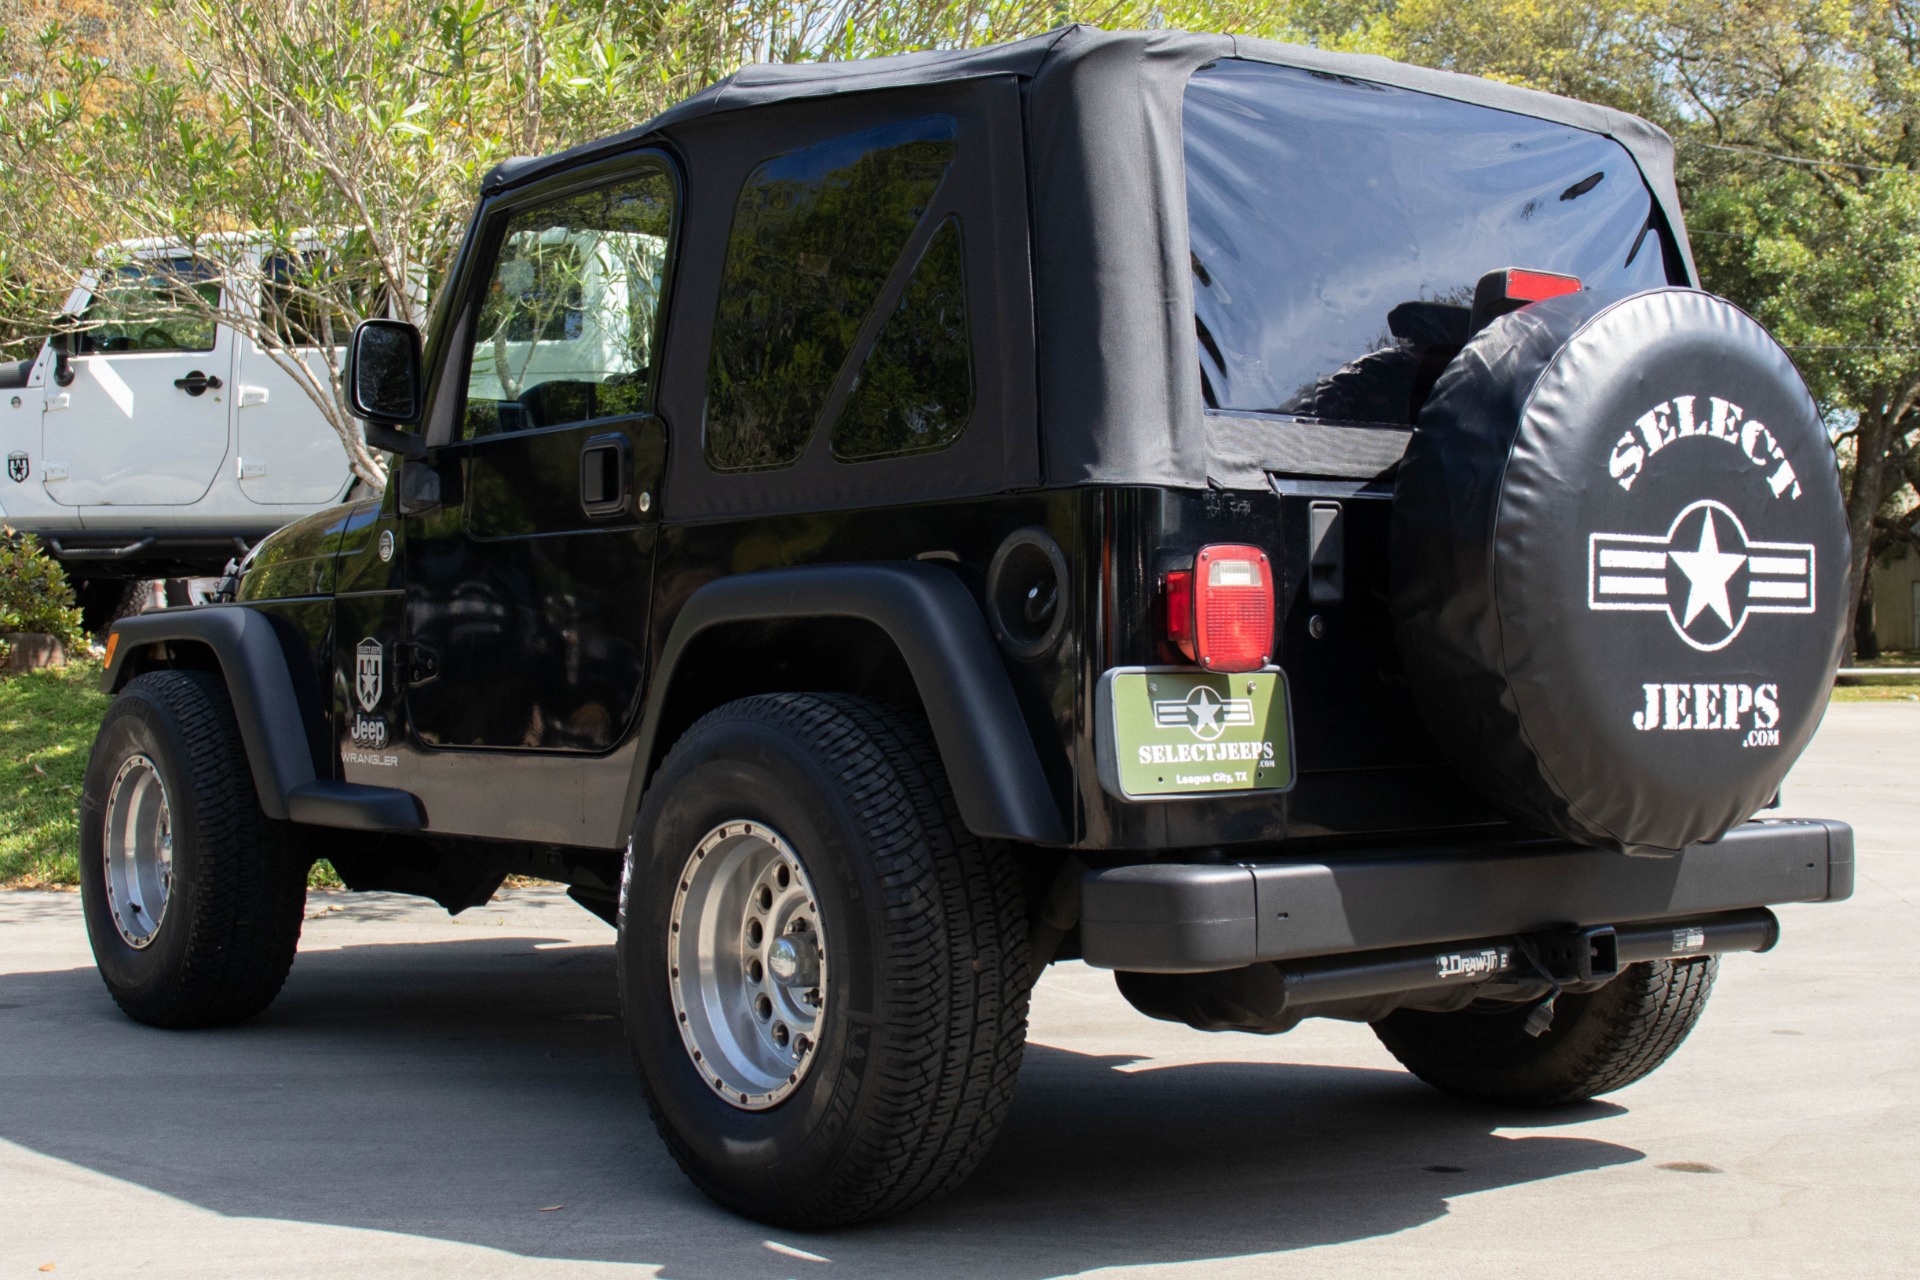 Used 2005 Jeep Wrangler X For Sale ($13,995) | Select ...